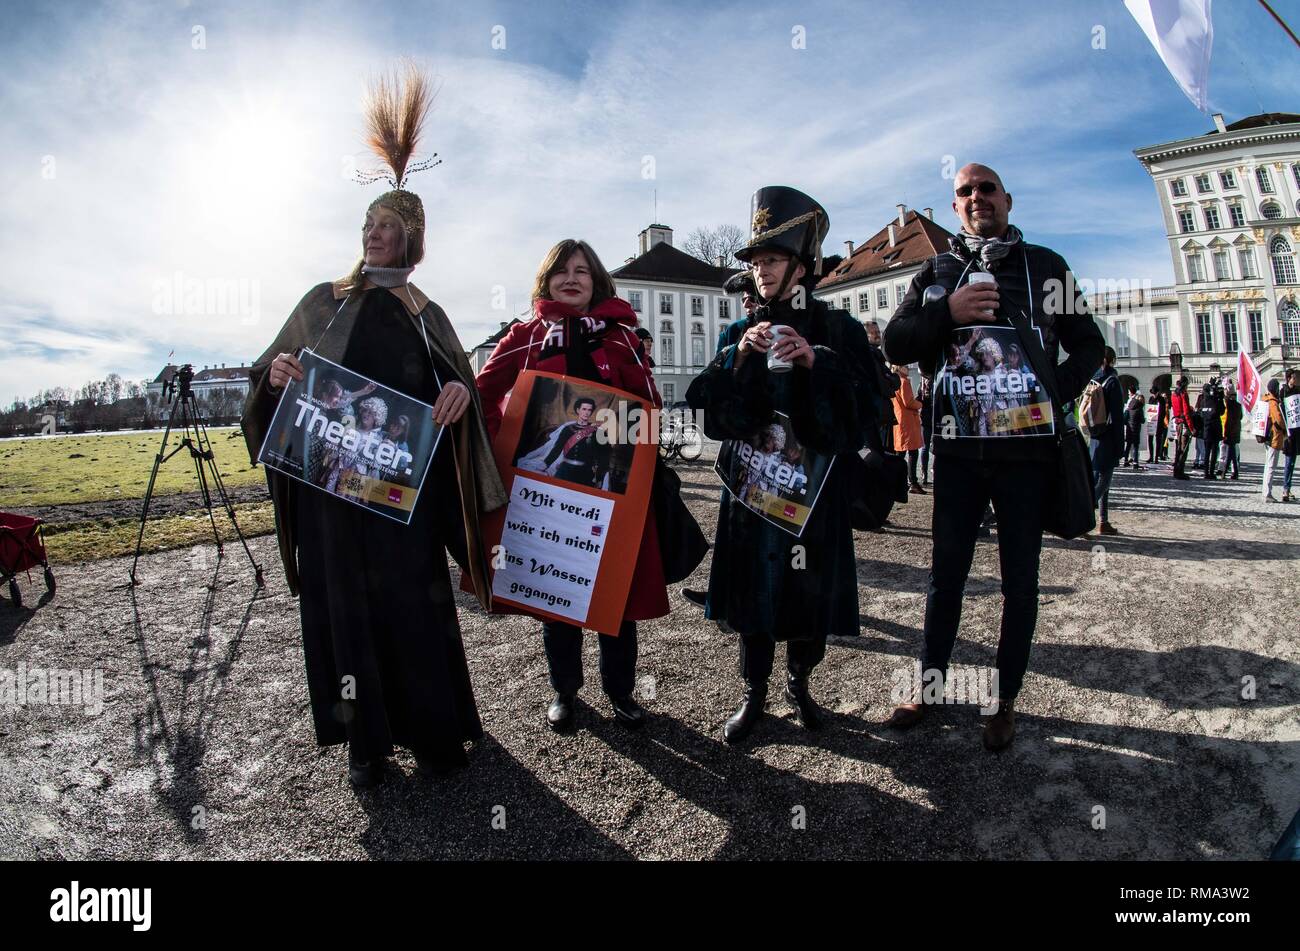 February 14, 2019 - Munich, Bavaria, Germany - Theatre workers joining in on the Verdi strike. To signify the failure of the second round of talks with employers, the German Verdi Ver.di labor union organized a 200+ strong flashmob action at the famed Schloss Nymphenburg in Munich to kick off a new strike wave.  The Union chose Castle Nymphenburg due to the pride and money Bavarian Ministerpresident Markus Soeder has invested into the castles of Bavaria, which in return have become major tourist attractions and income sources.  The union states that some of the money should be invested in the  Stock Photo